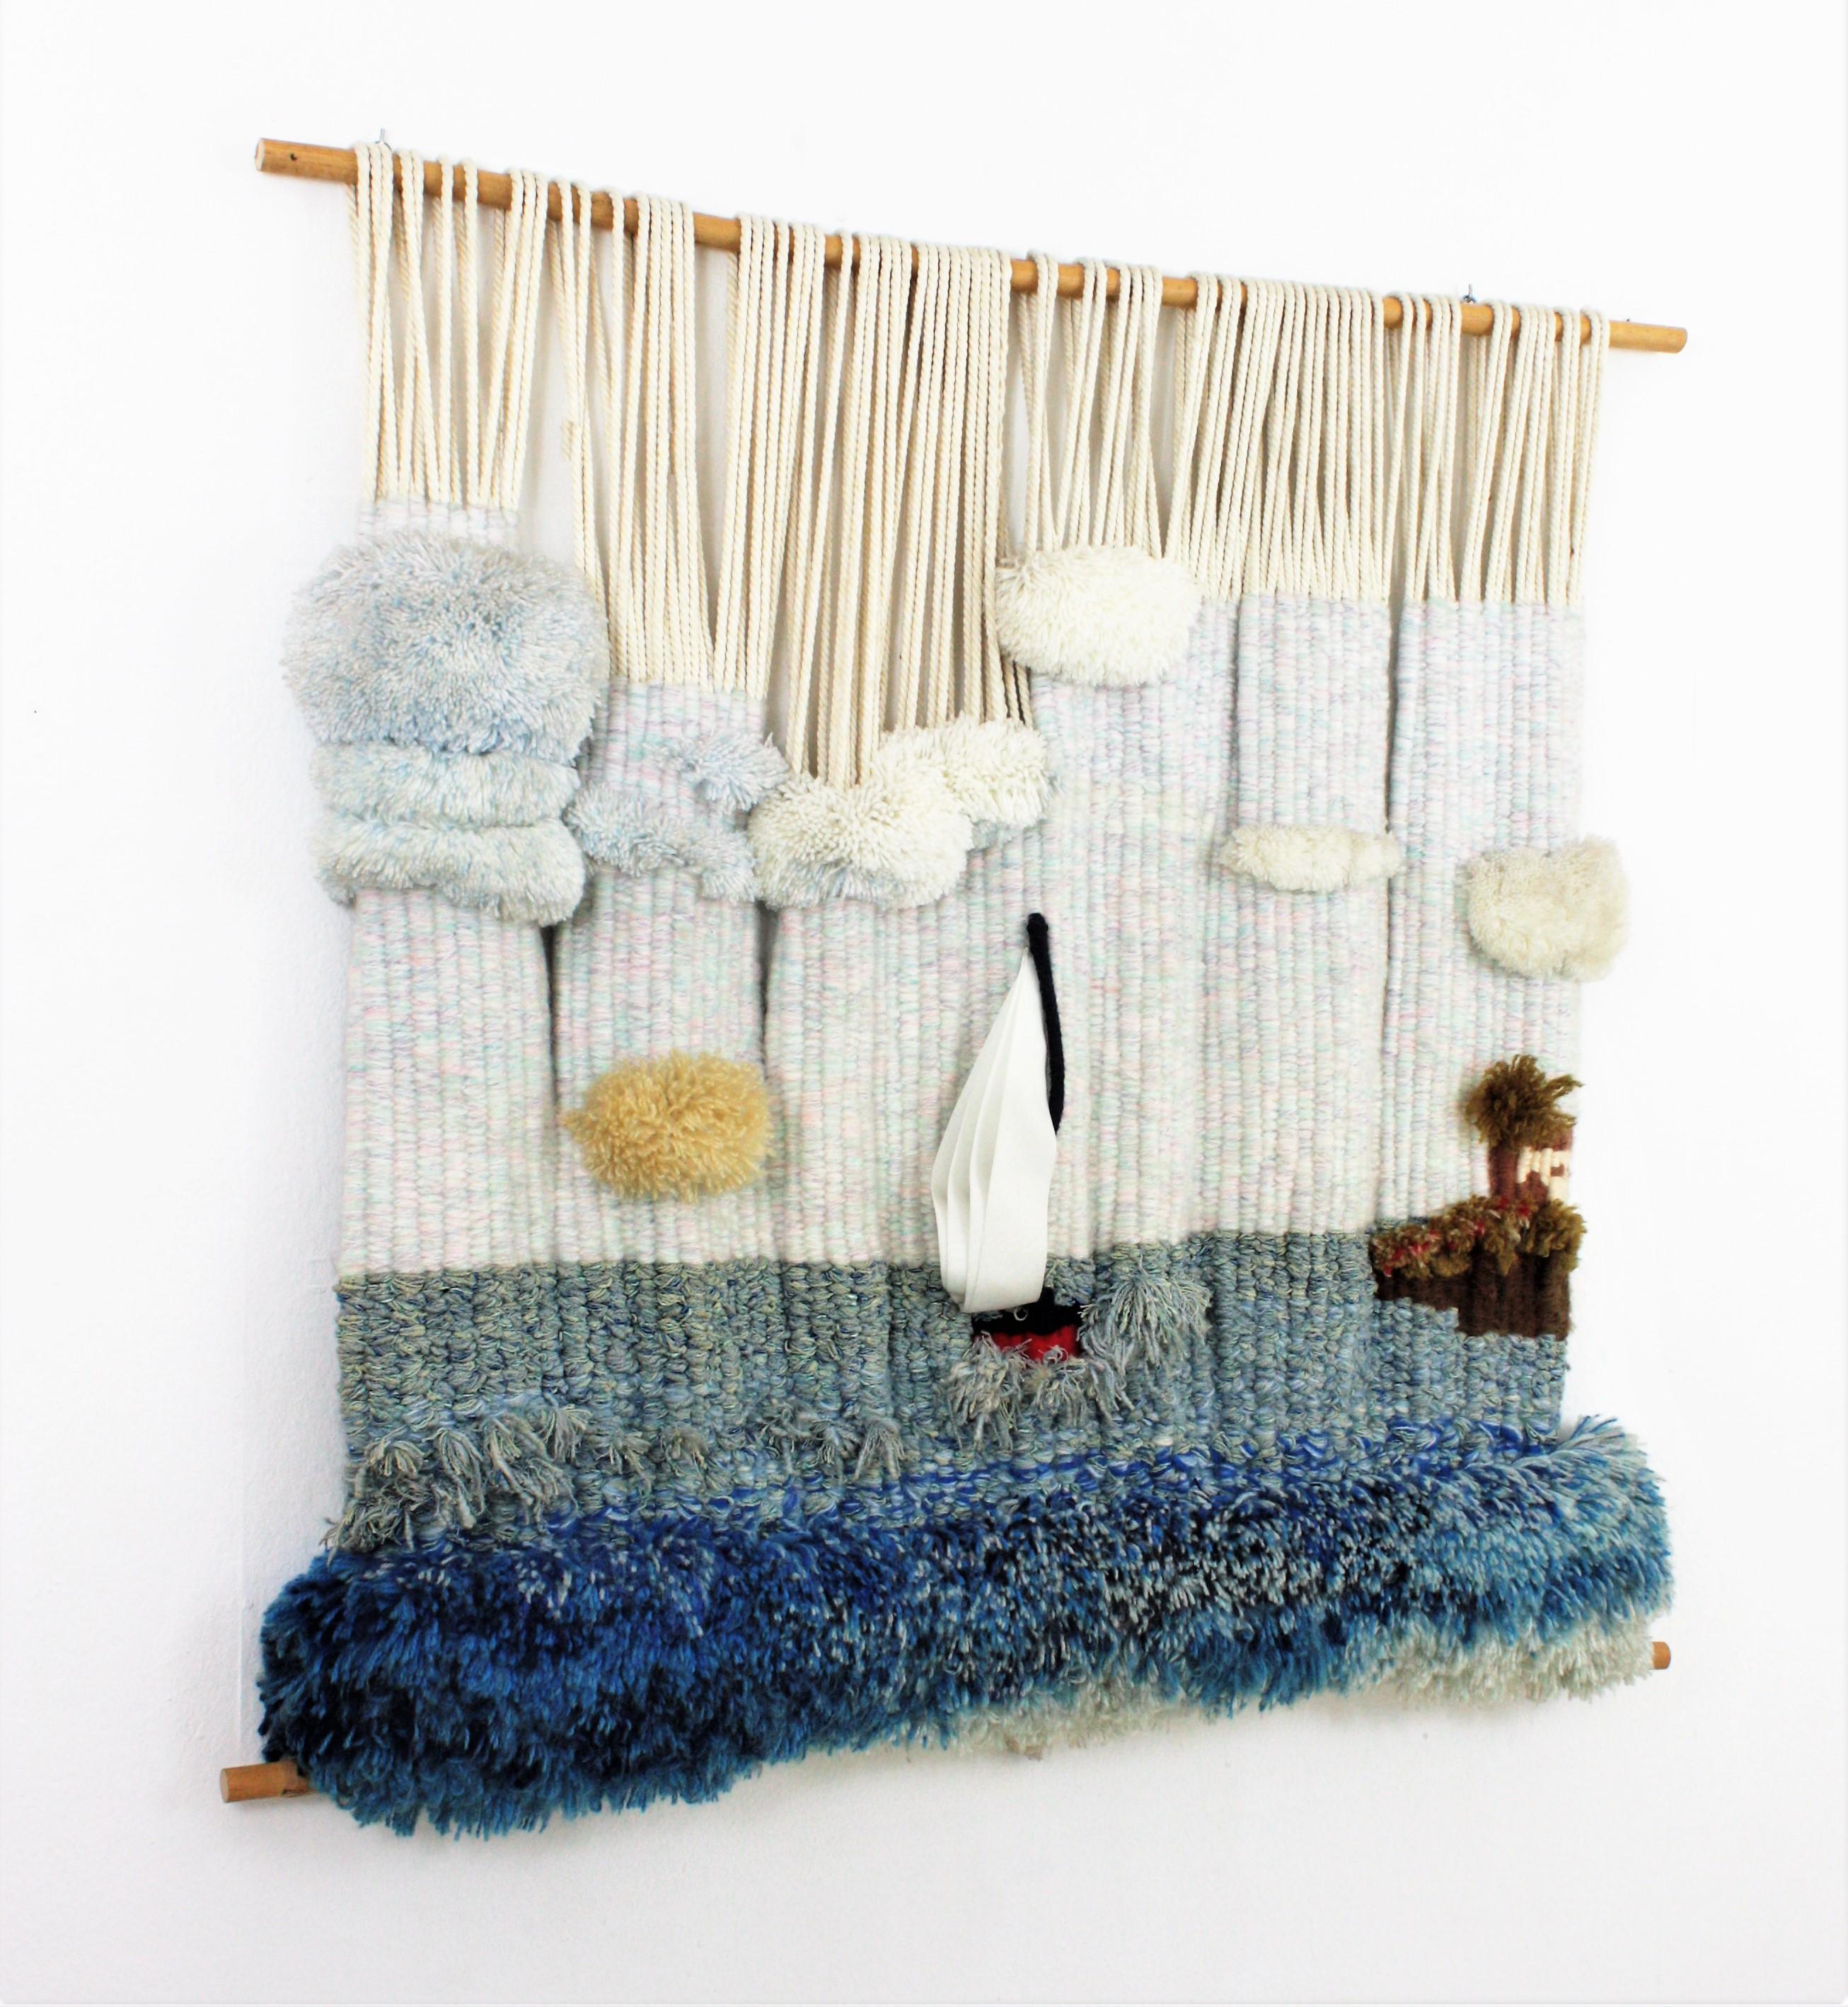 One of a kind large scale hand knitted wool Macrame wall hanging tapestry with sea landscape design, Spain, 1970s.
This wall art tapestry is all made by hand with handwoven and dyed wool and fibers in different shades of blue, white and pastel